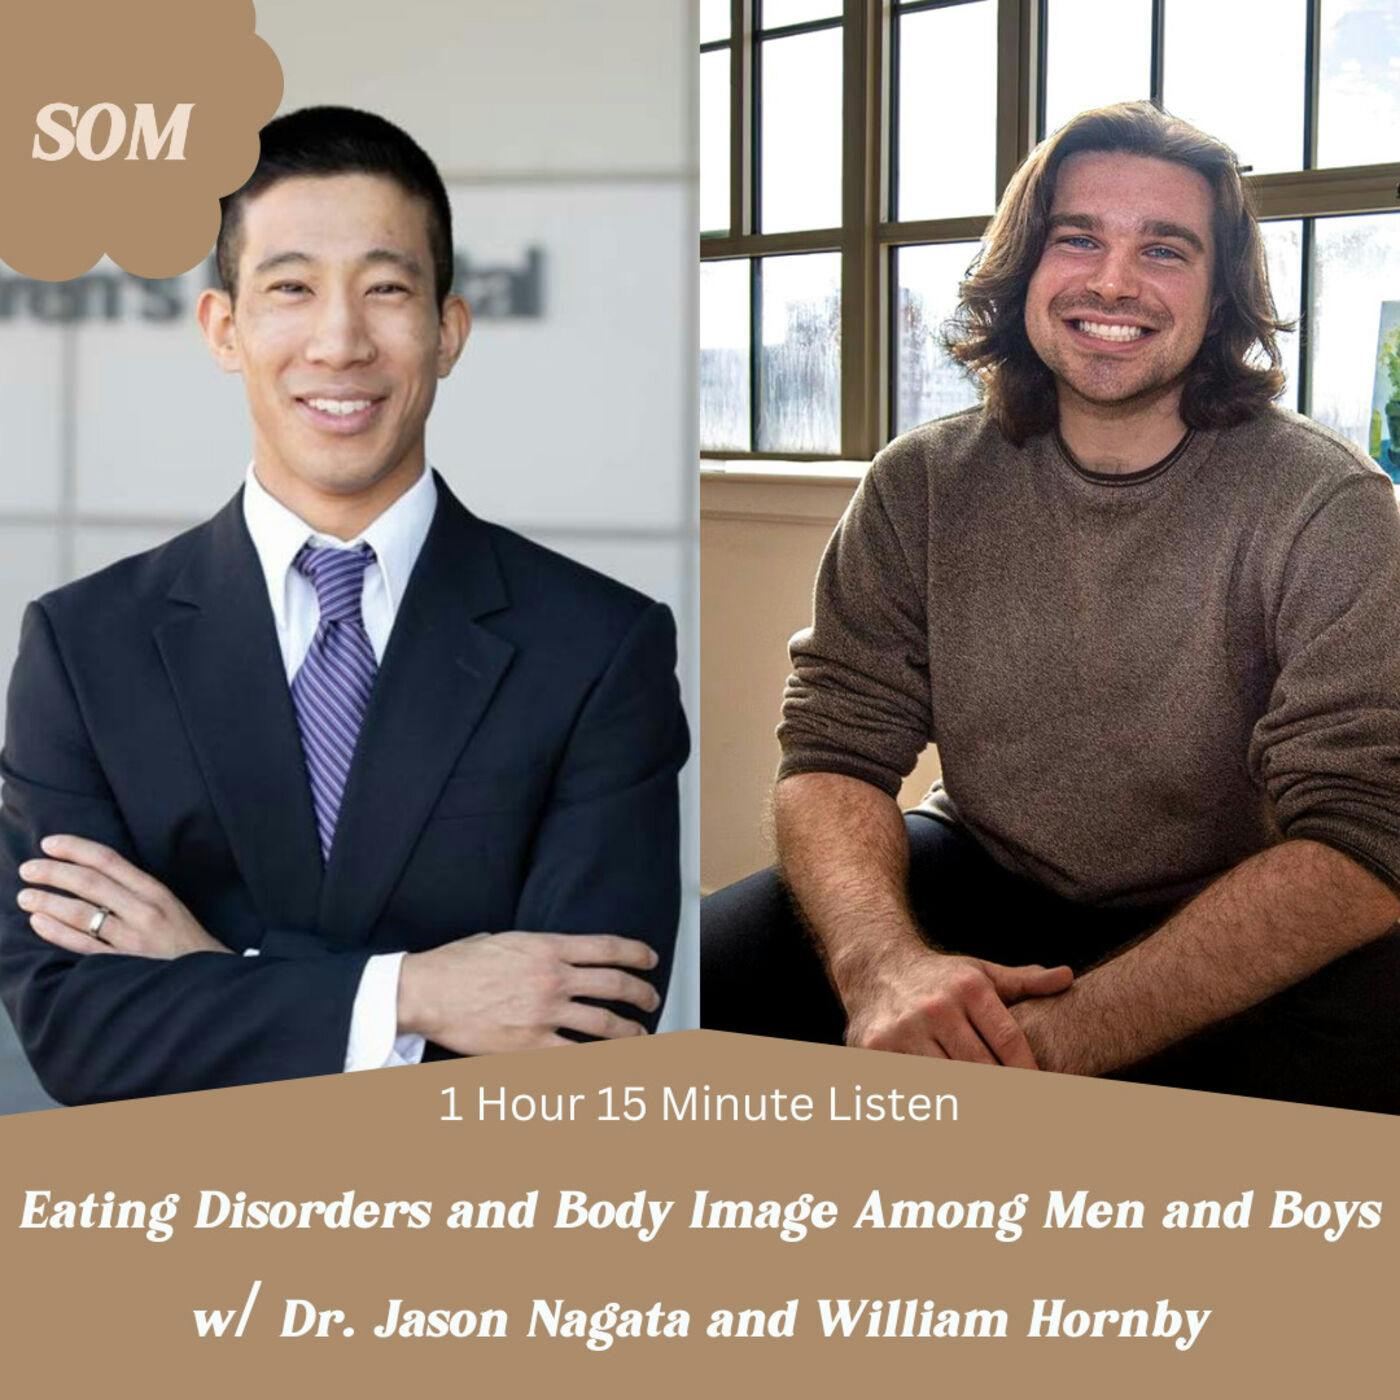 Eating Disorders and Body Image Among Boys and Men w/ Dr. Jason Nagata and William Hornby